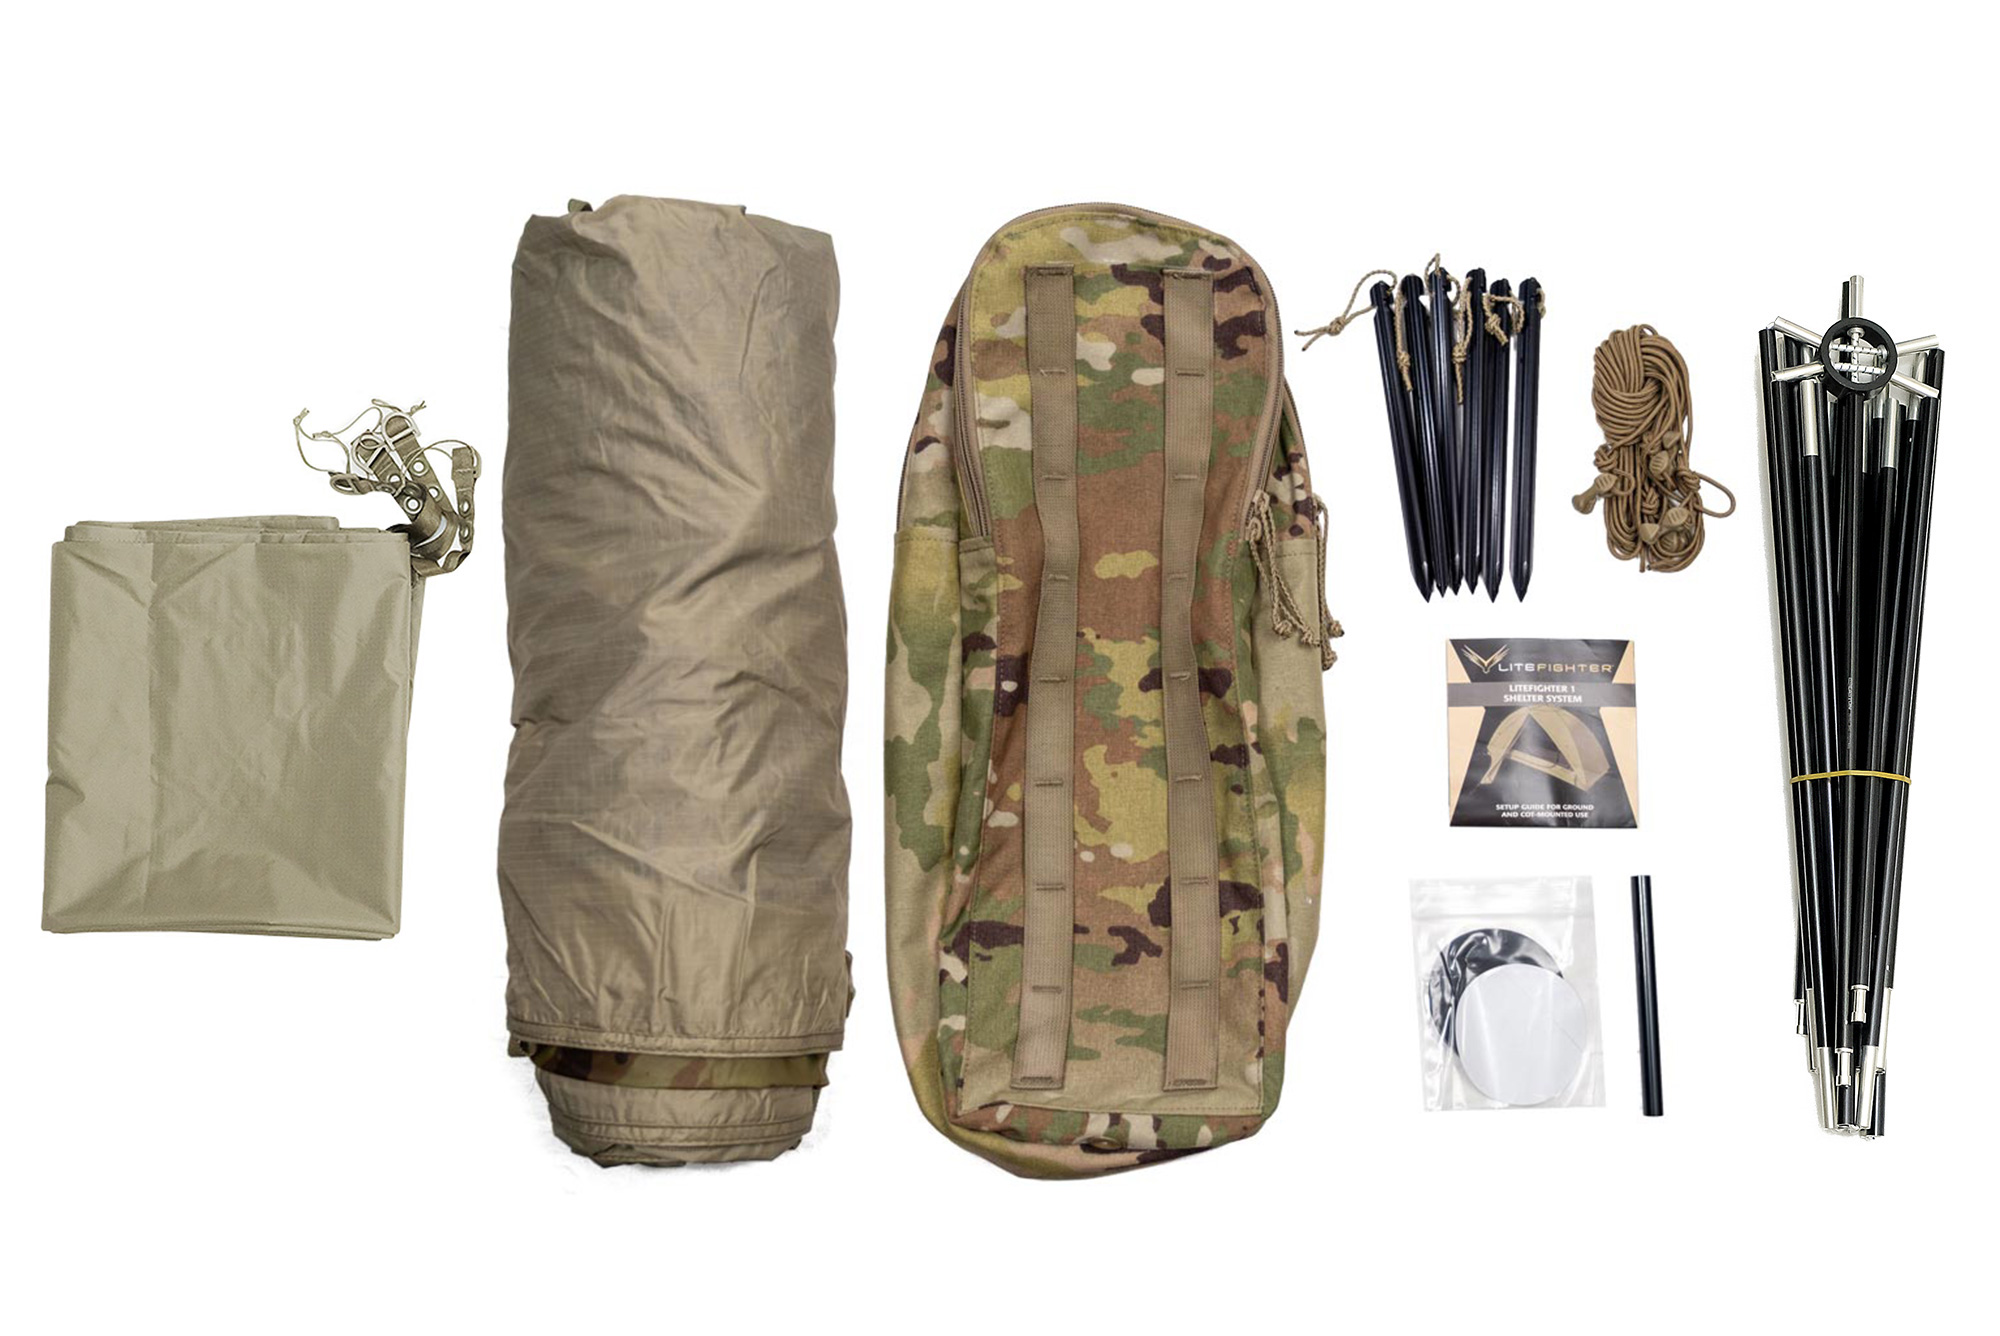 New Litefighter 1 Multicam Ocp Individual Army Tent Nsn 8340-01-628-8855